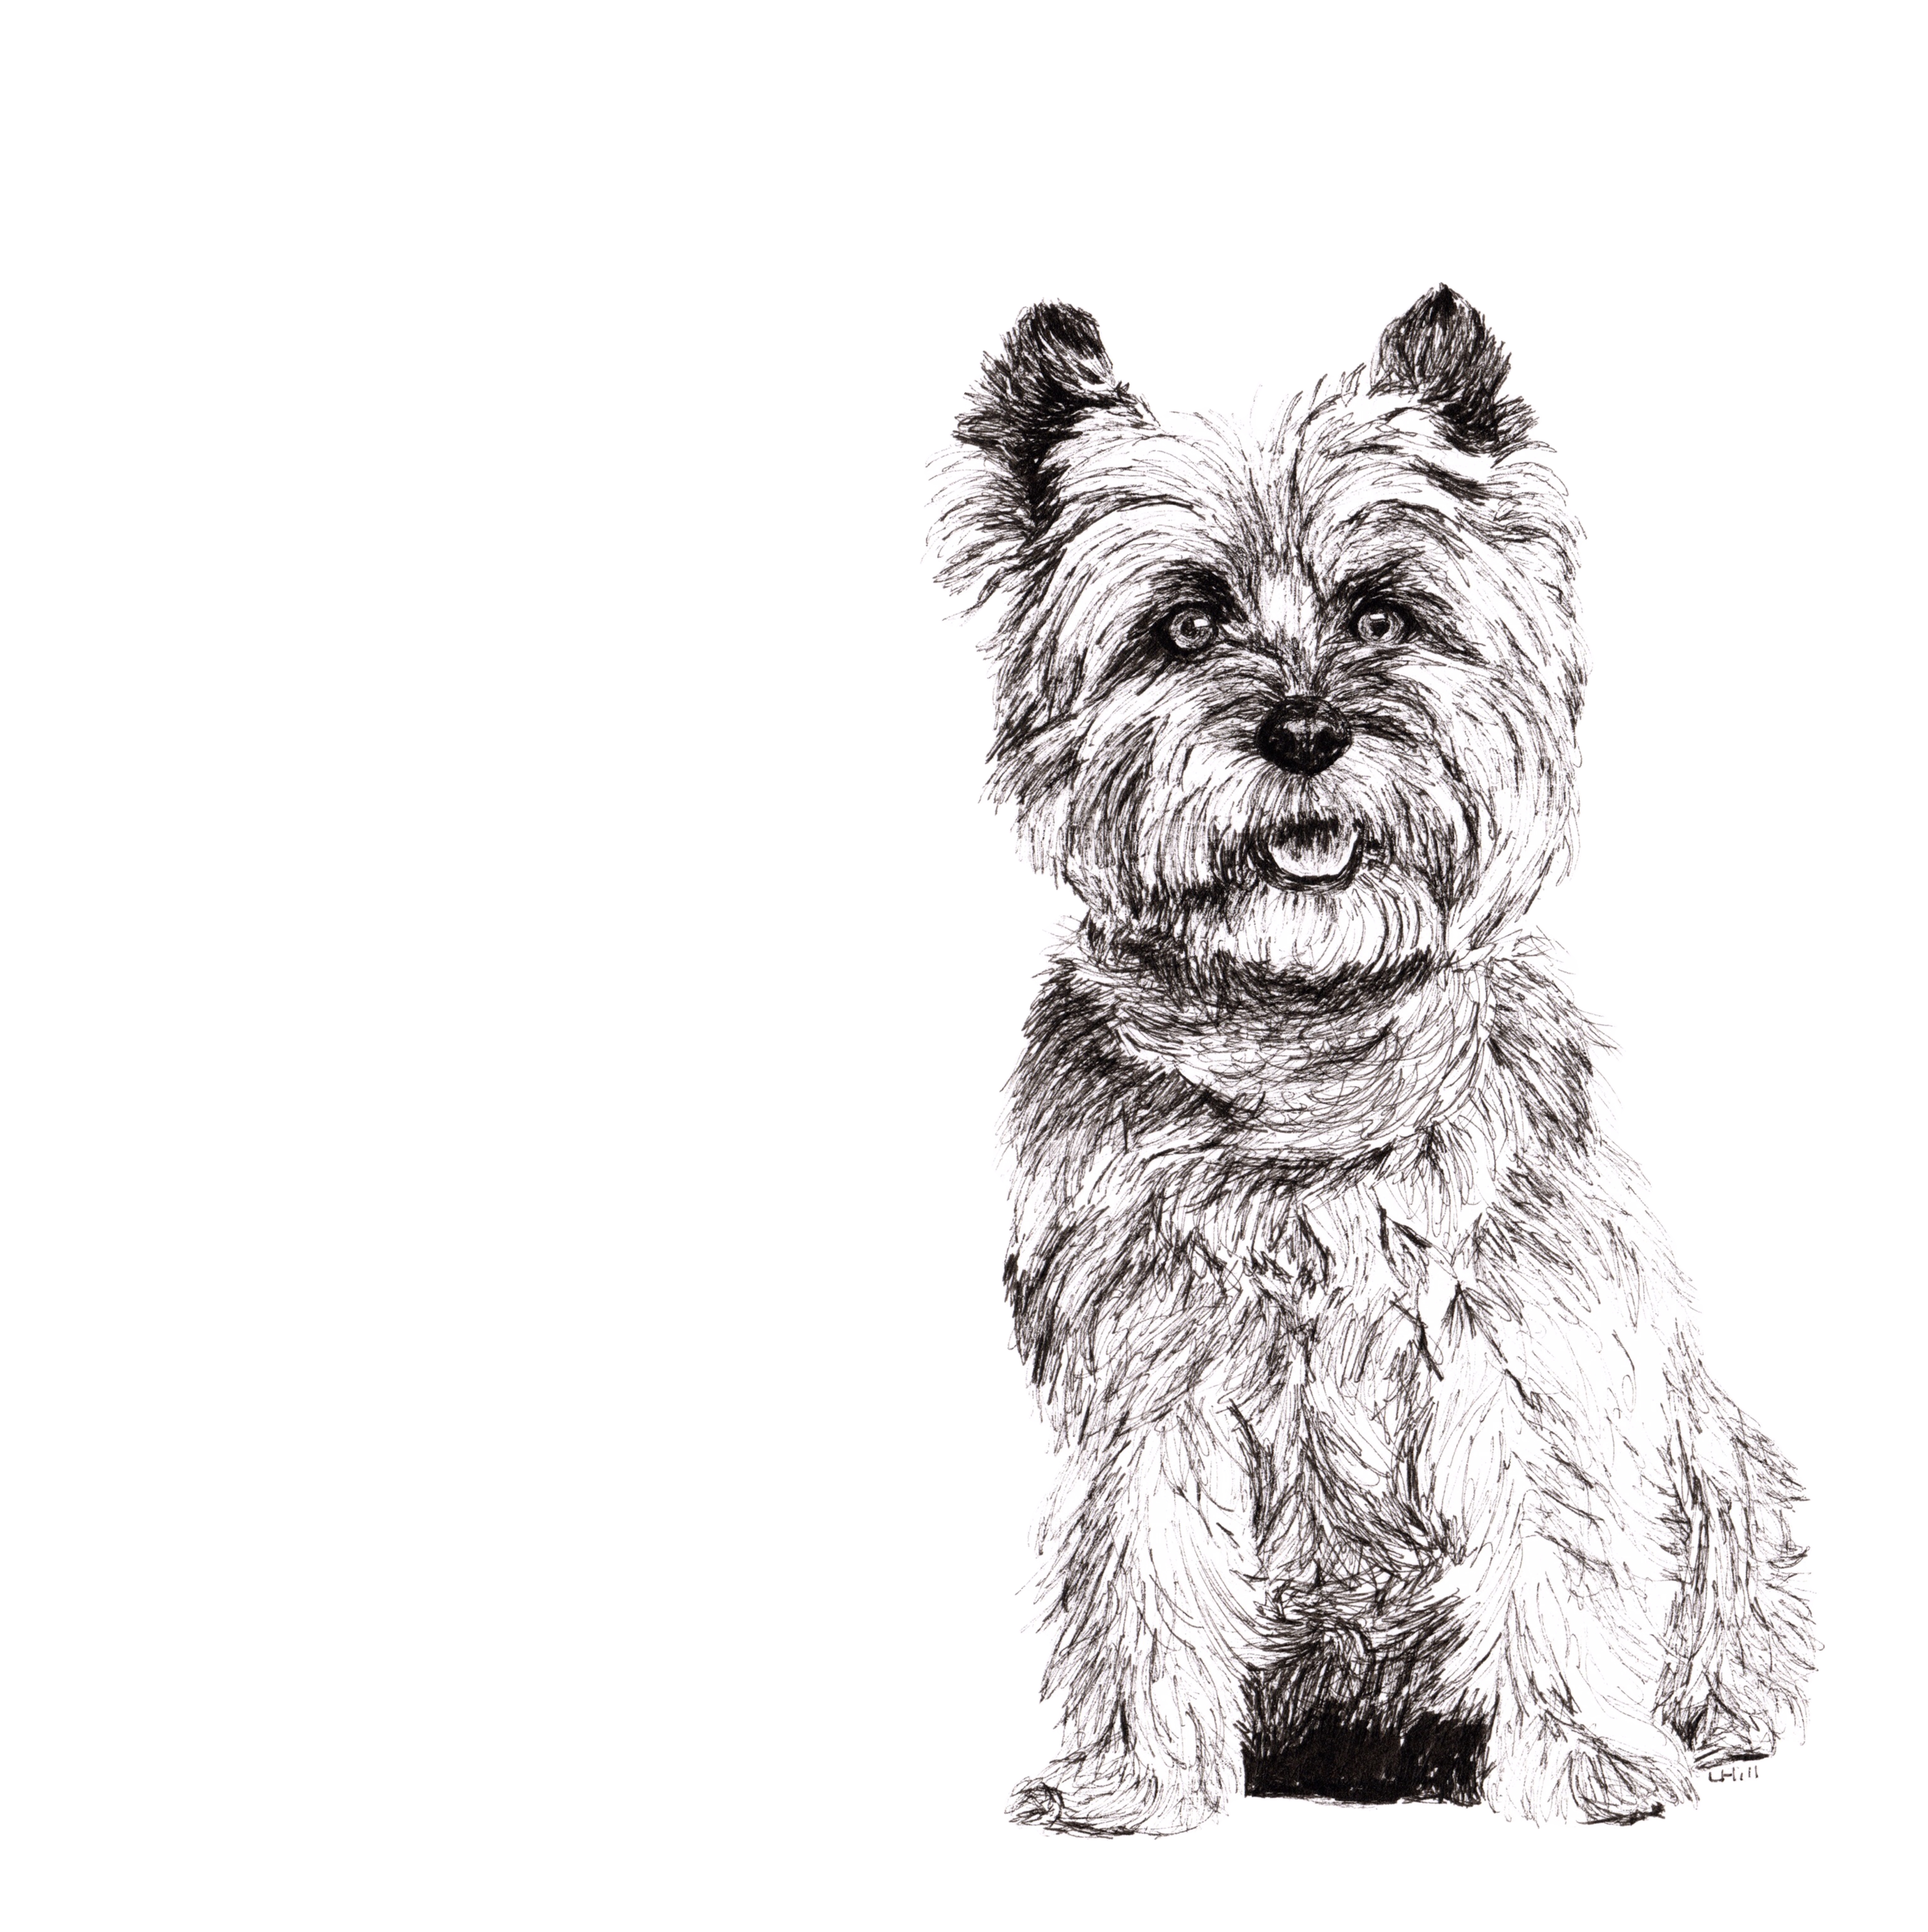 Cairn Terrier pen and ink illustration by Louisa Hill